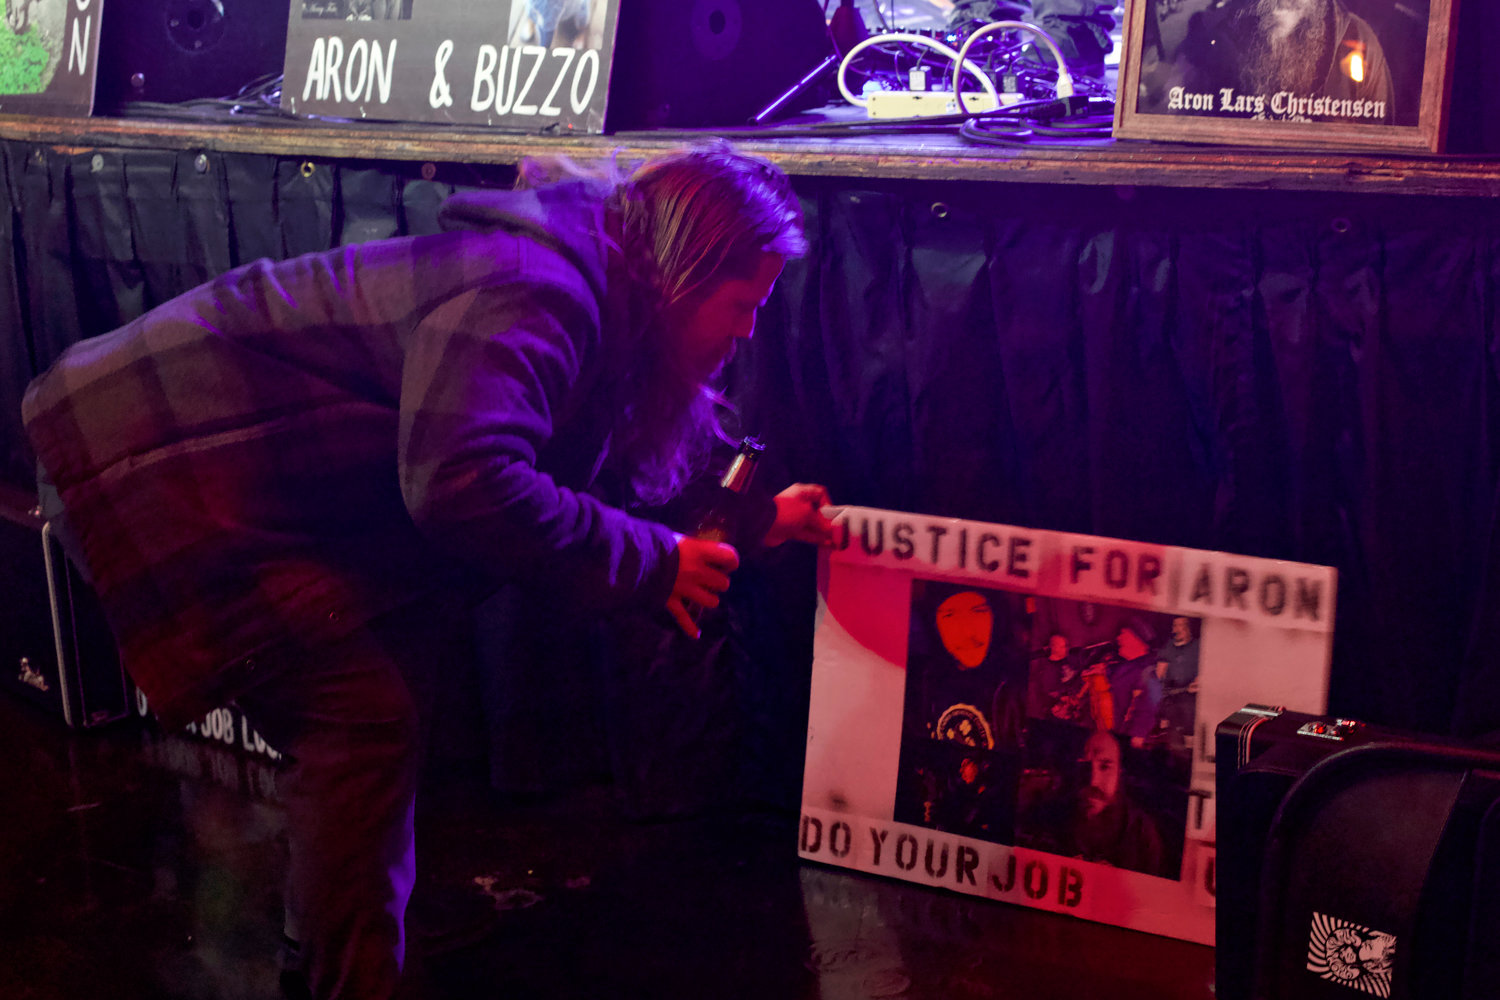 A concertgoer helps fix a sign that reads “Justice for Aron” and “Do Your Job” at a 50th birthday celebration for Aron Christensen held at Dante’s in Portland on Friday.